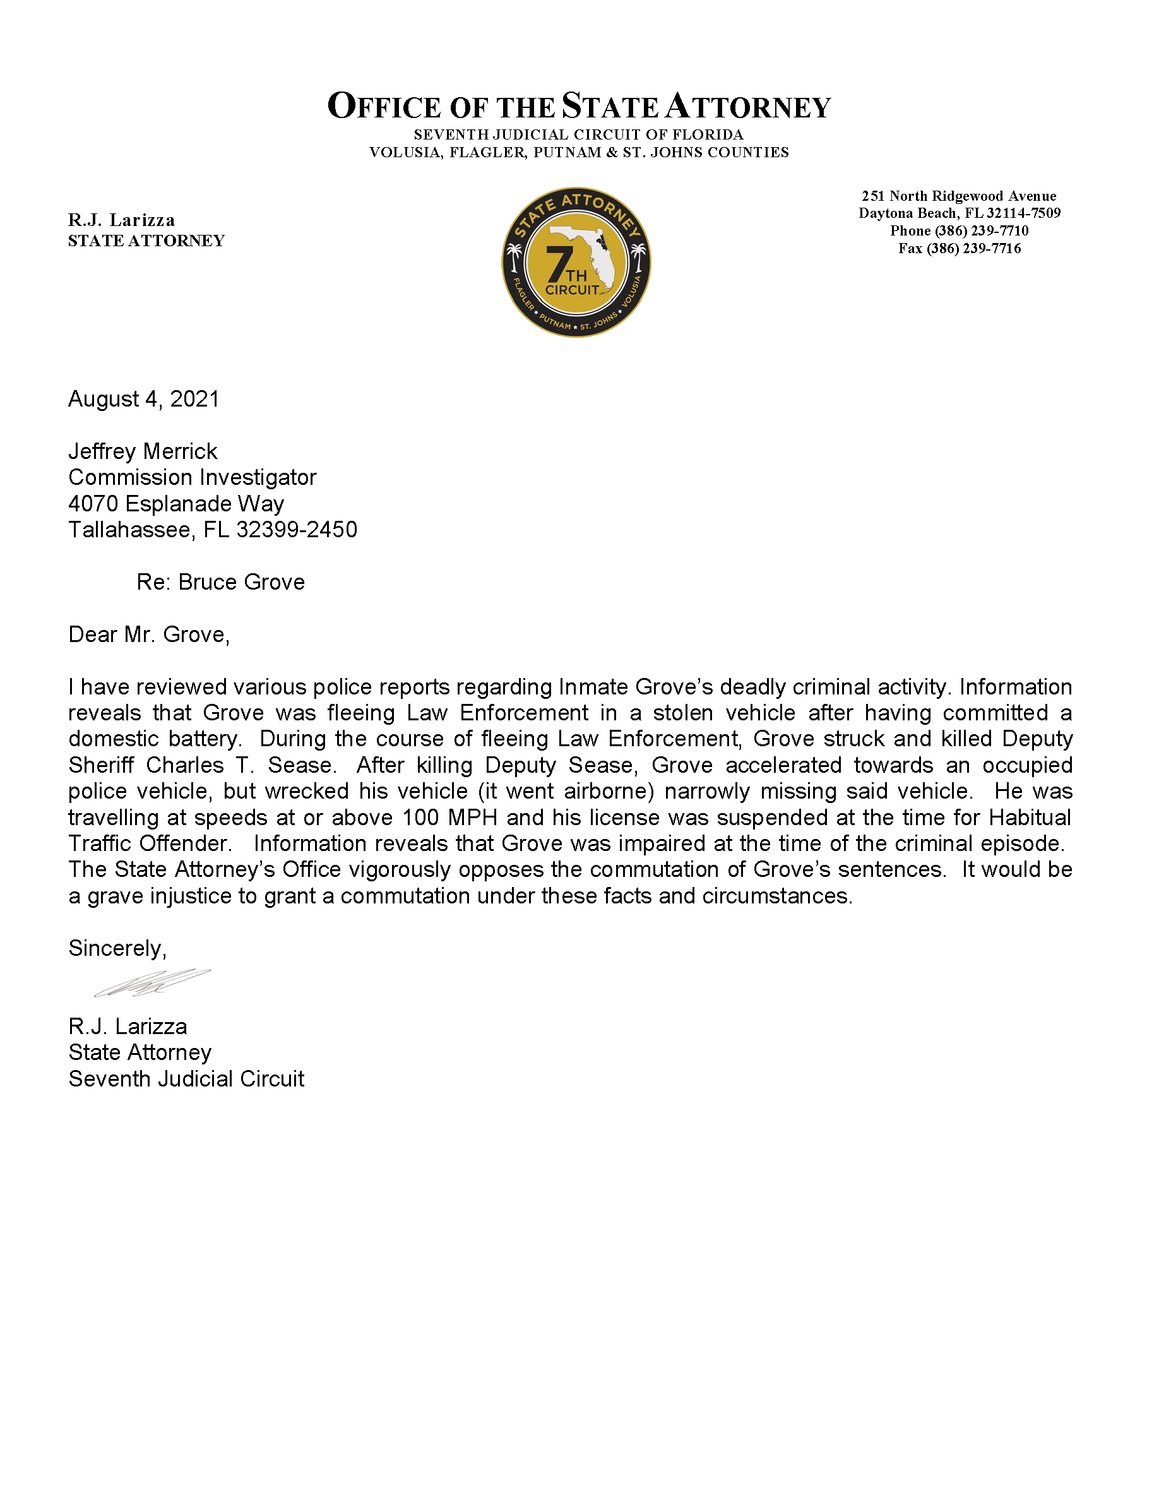 State Attorney RJ Larizza's letter to the Florida Commission on Offender Review